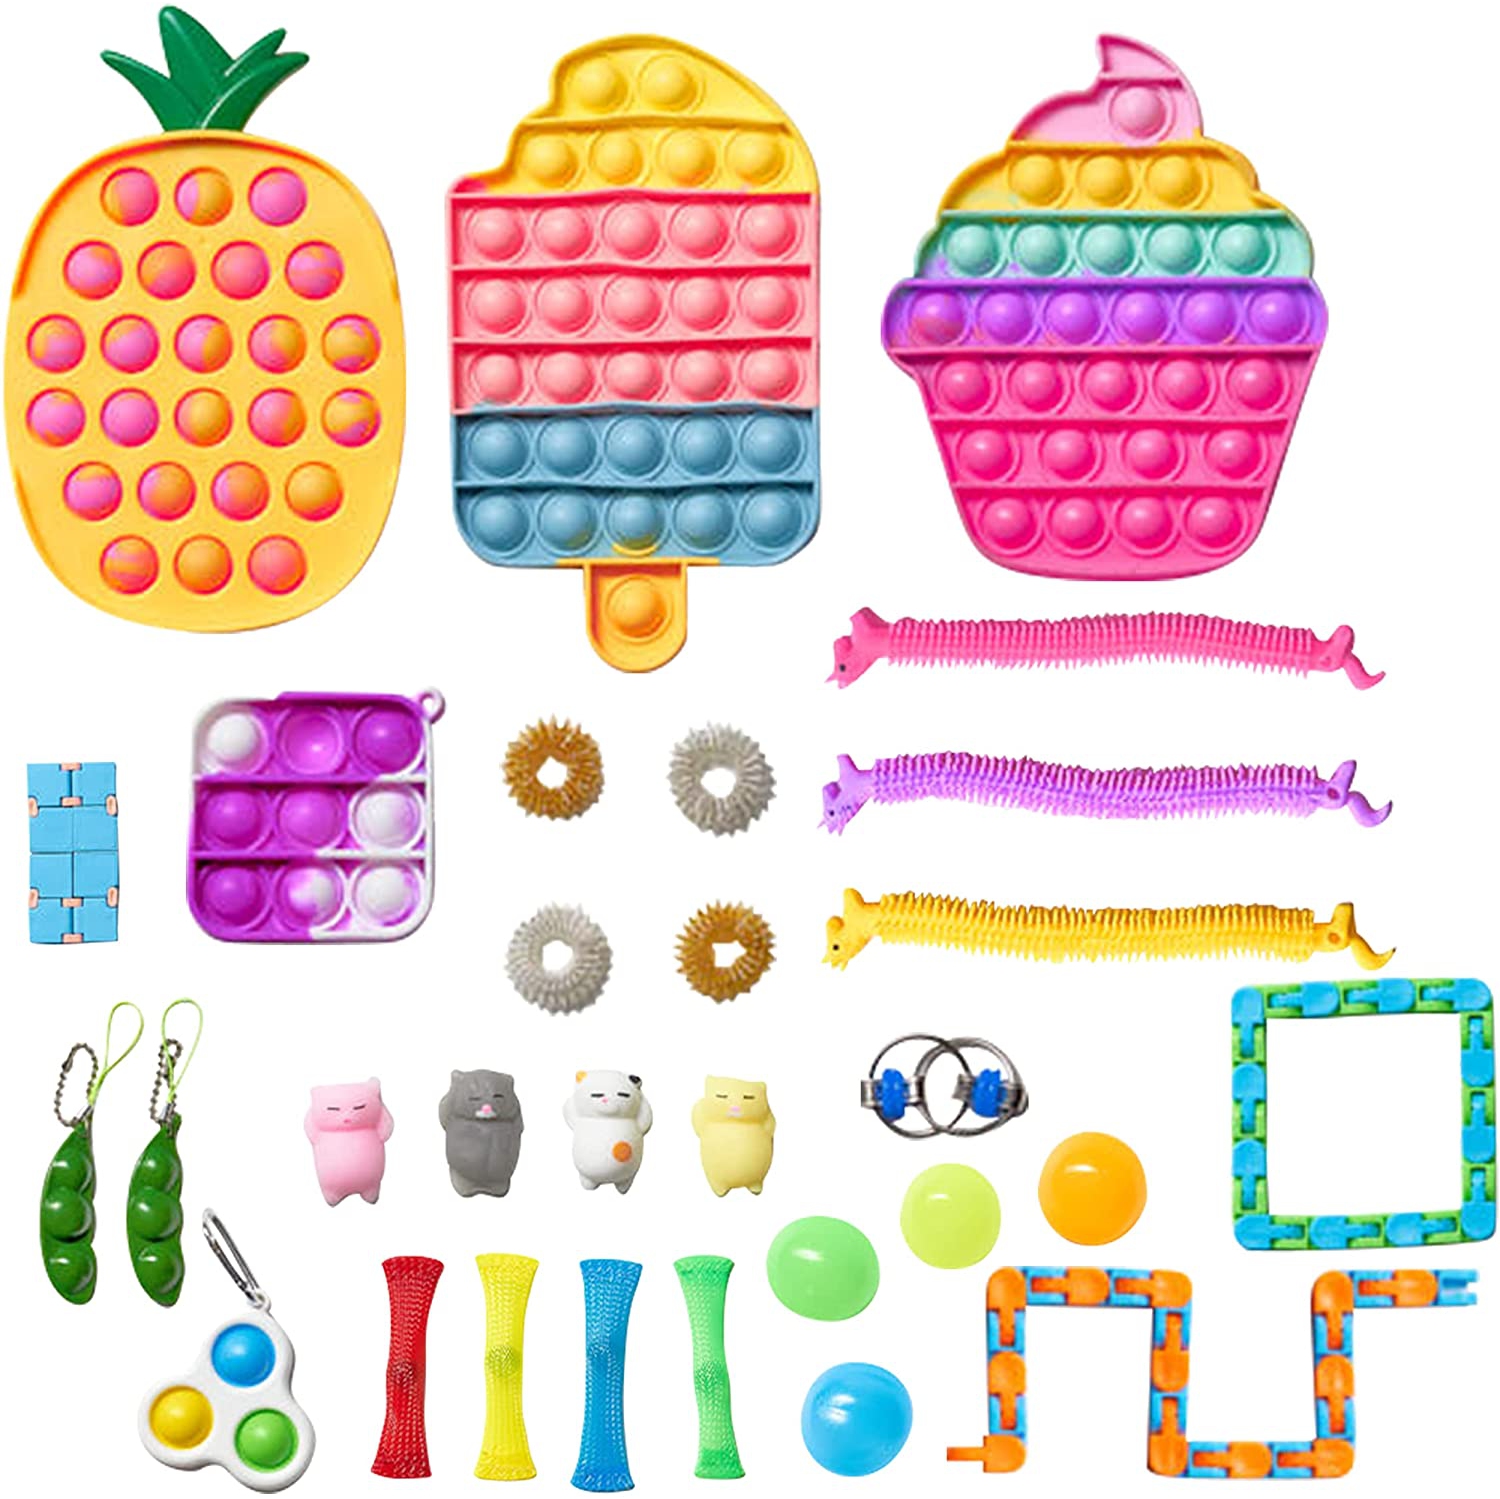 30 PCS- Pop Fidget Toy Pack,Push Popping Bubble Sensory Toy Set,Pop on Its Simple Dimple Autism Stress Anxiety Relief Squeeze Bundle Toy for Kid Adult